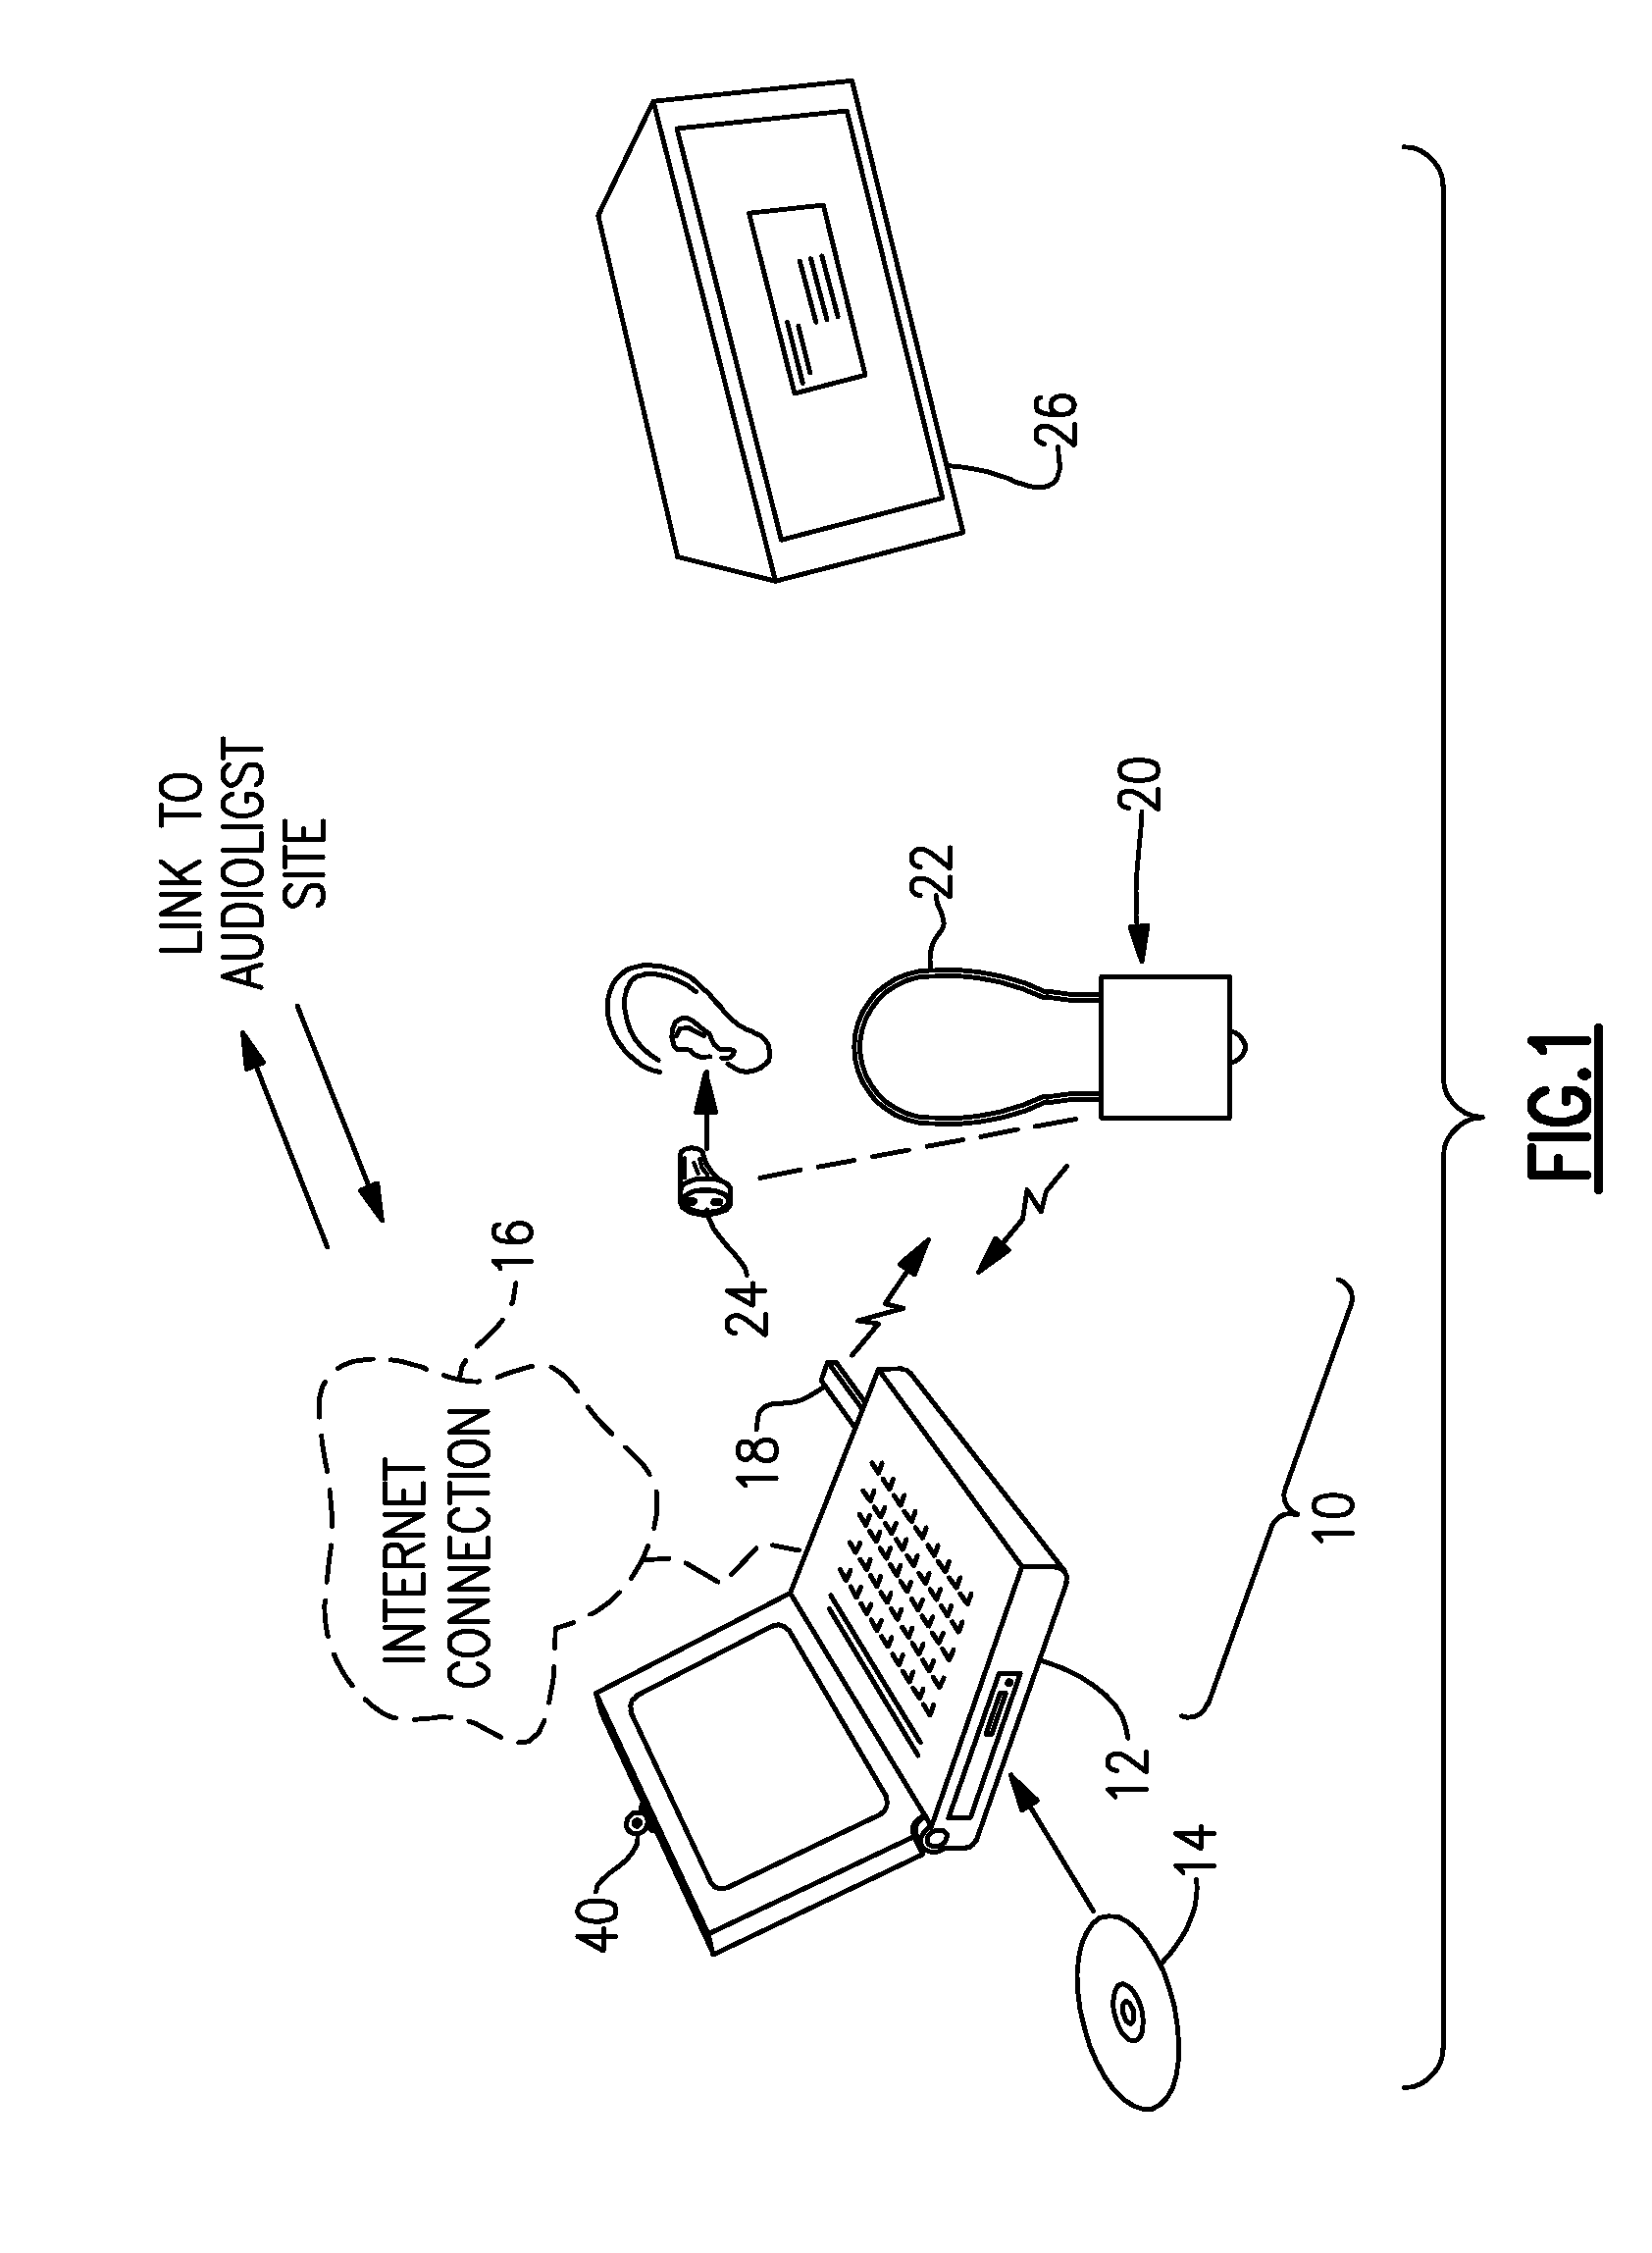 Remote Programming System for Programmable Hearing Aids